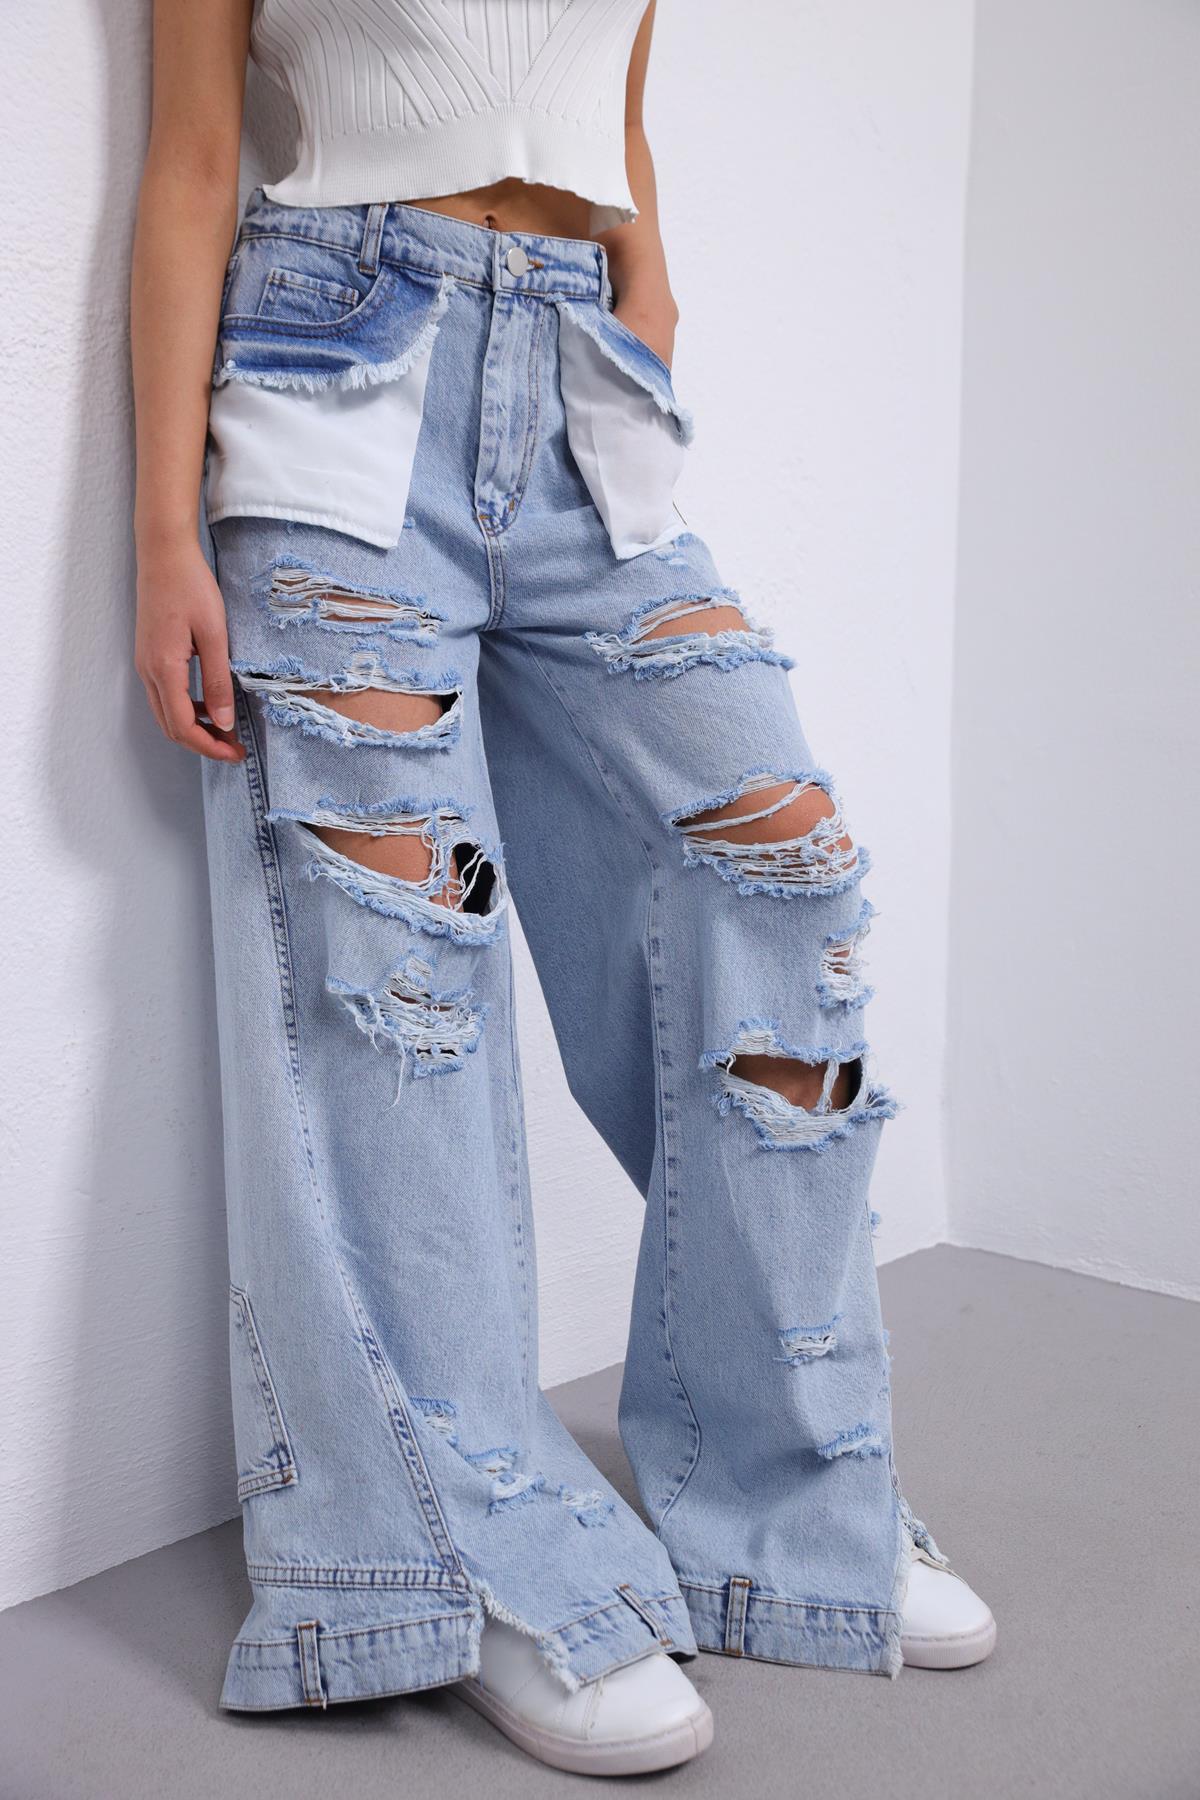 Blue Disstressed Ripped Jeans Pants